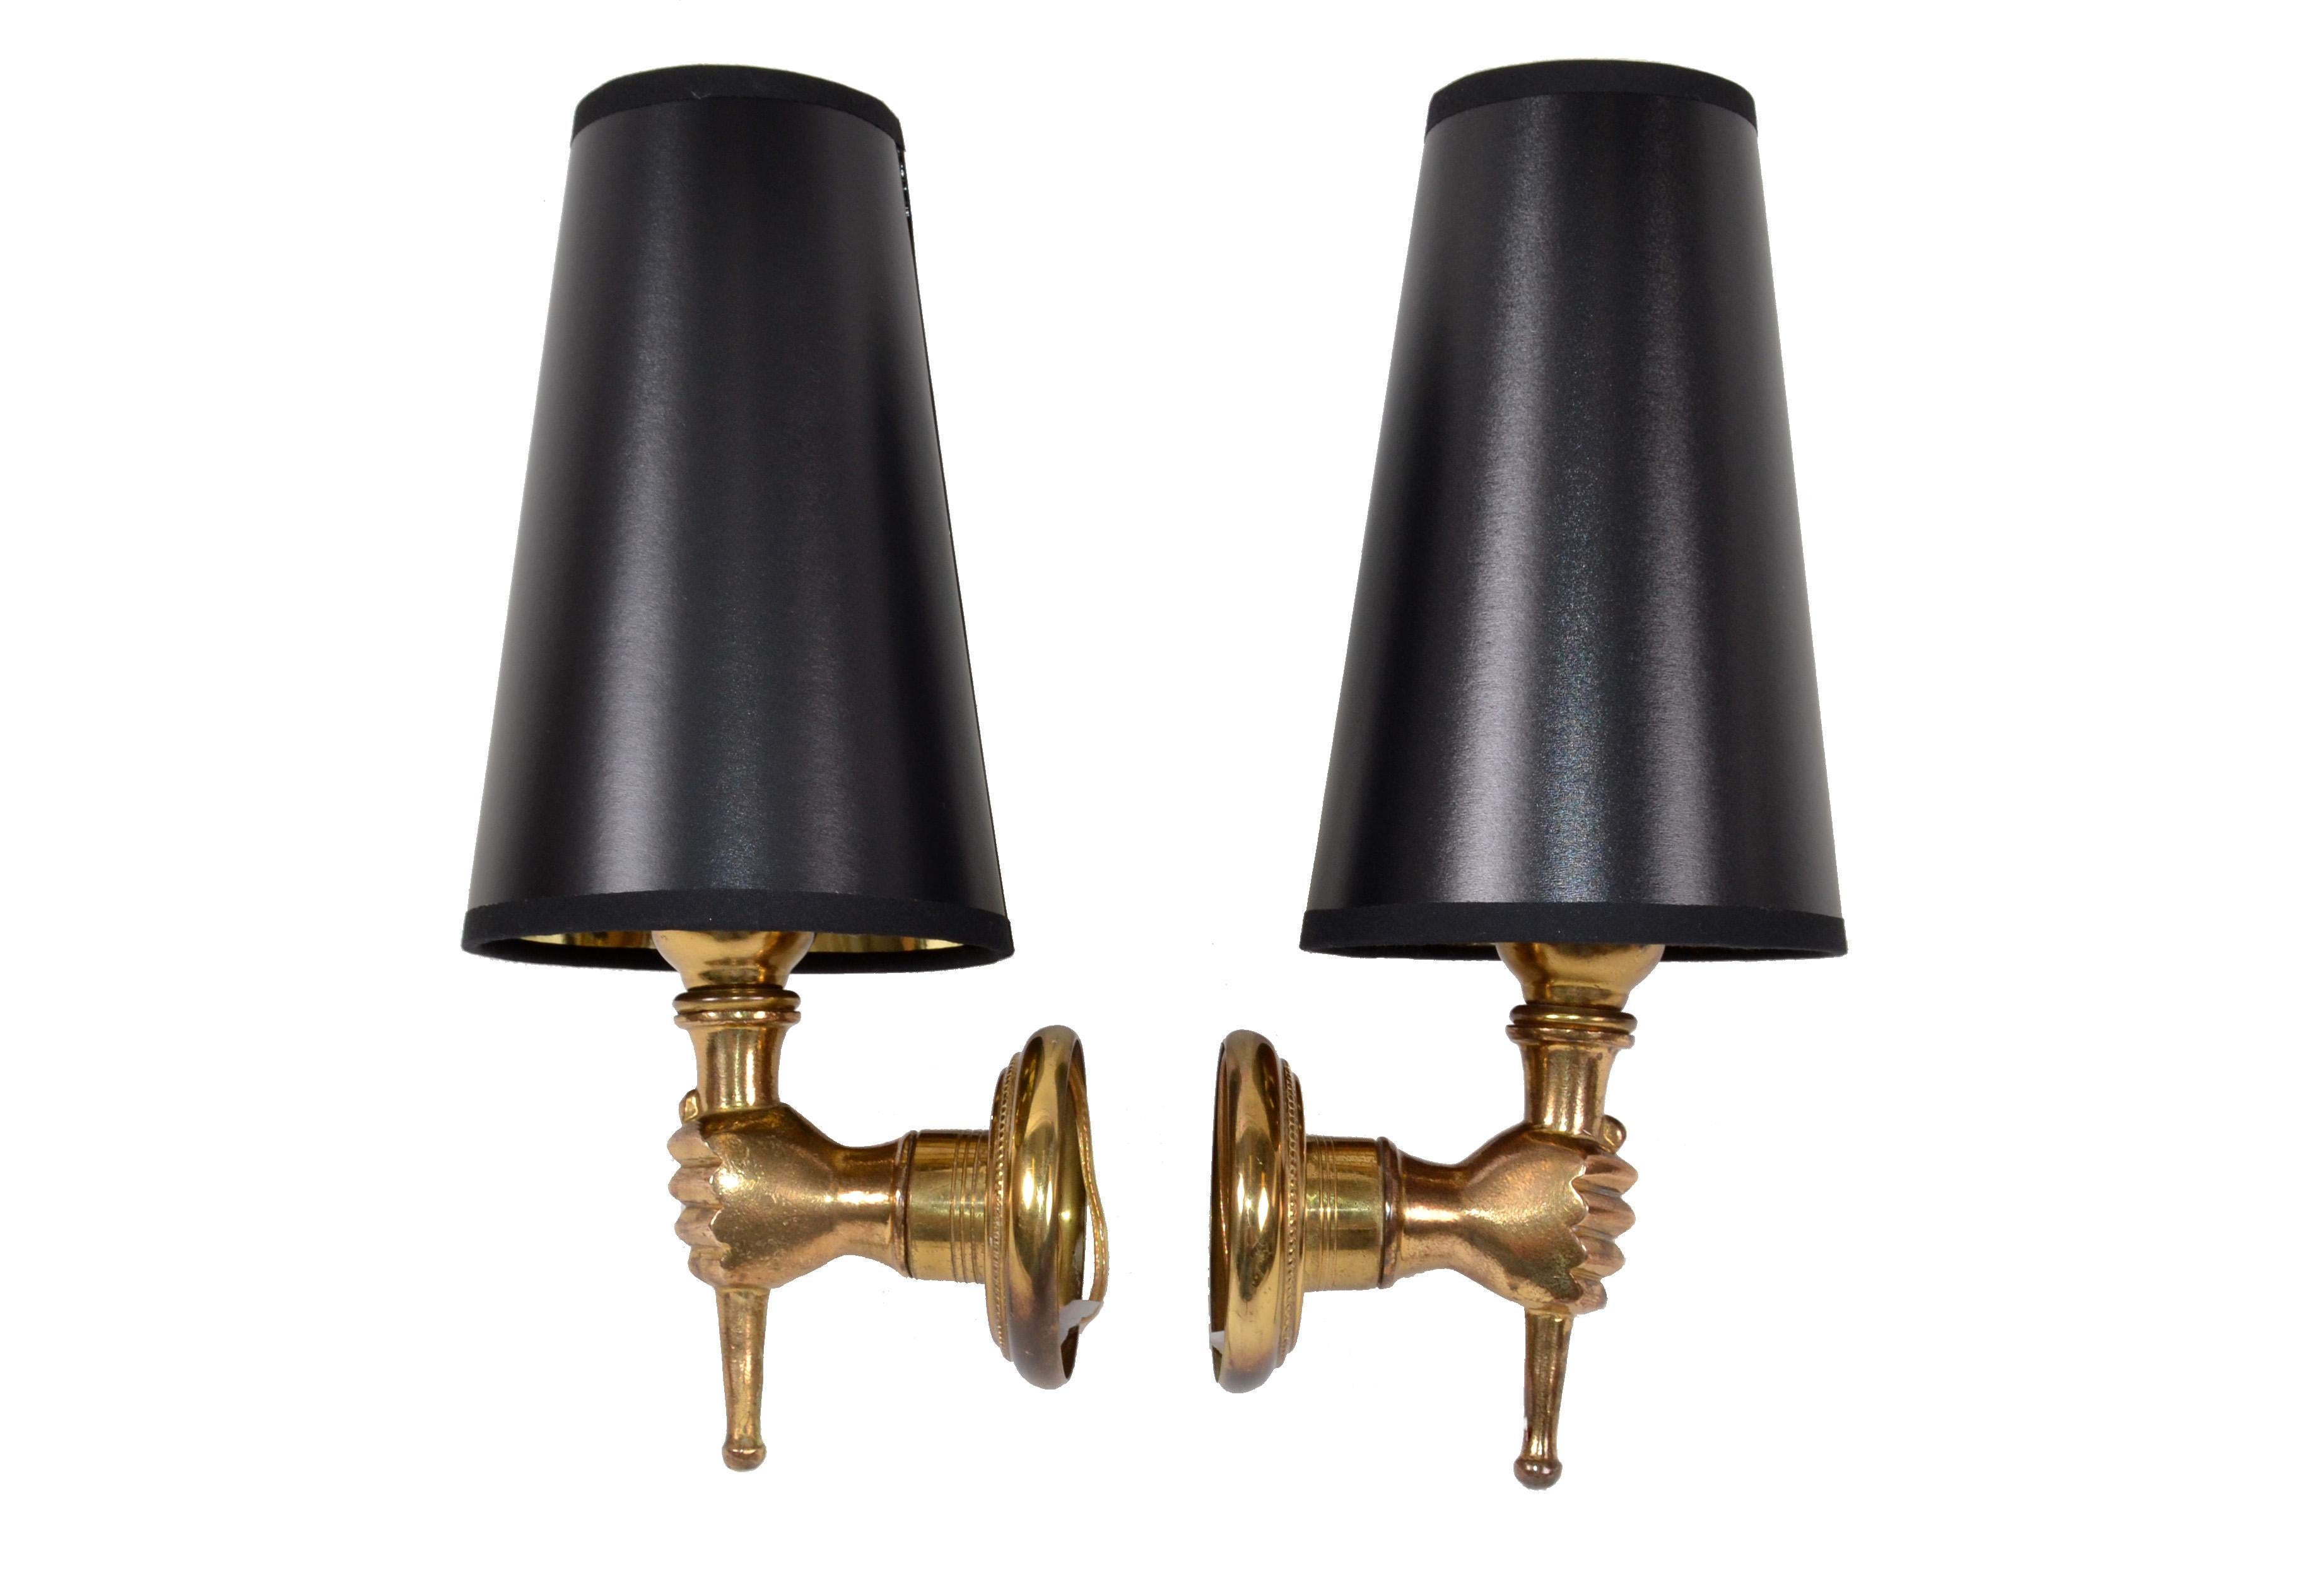 Very elegant André Arbus French bronze neoclassical hand sconces, wall lamps.
Priced by pair.
US rewiring and each takes a light bulb max. 40 watts.
Measures: back-plate measures: diameter 3.5 inches.
Height to top of socket is 5.25